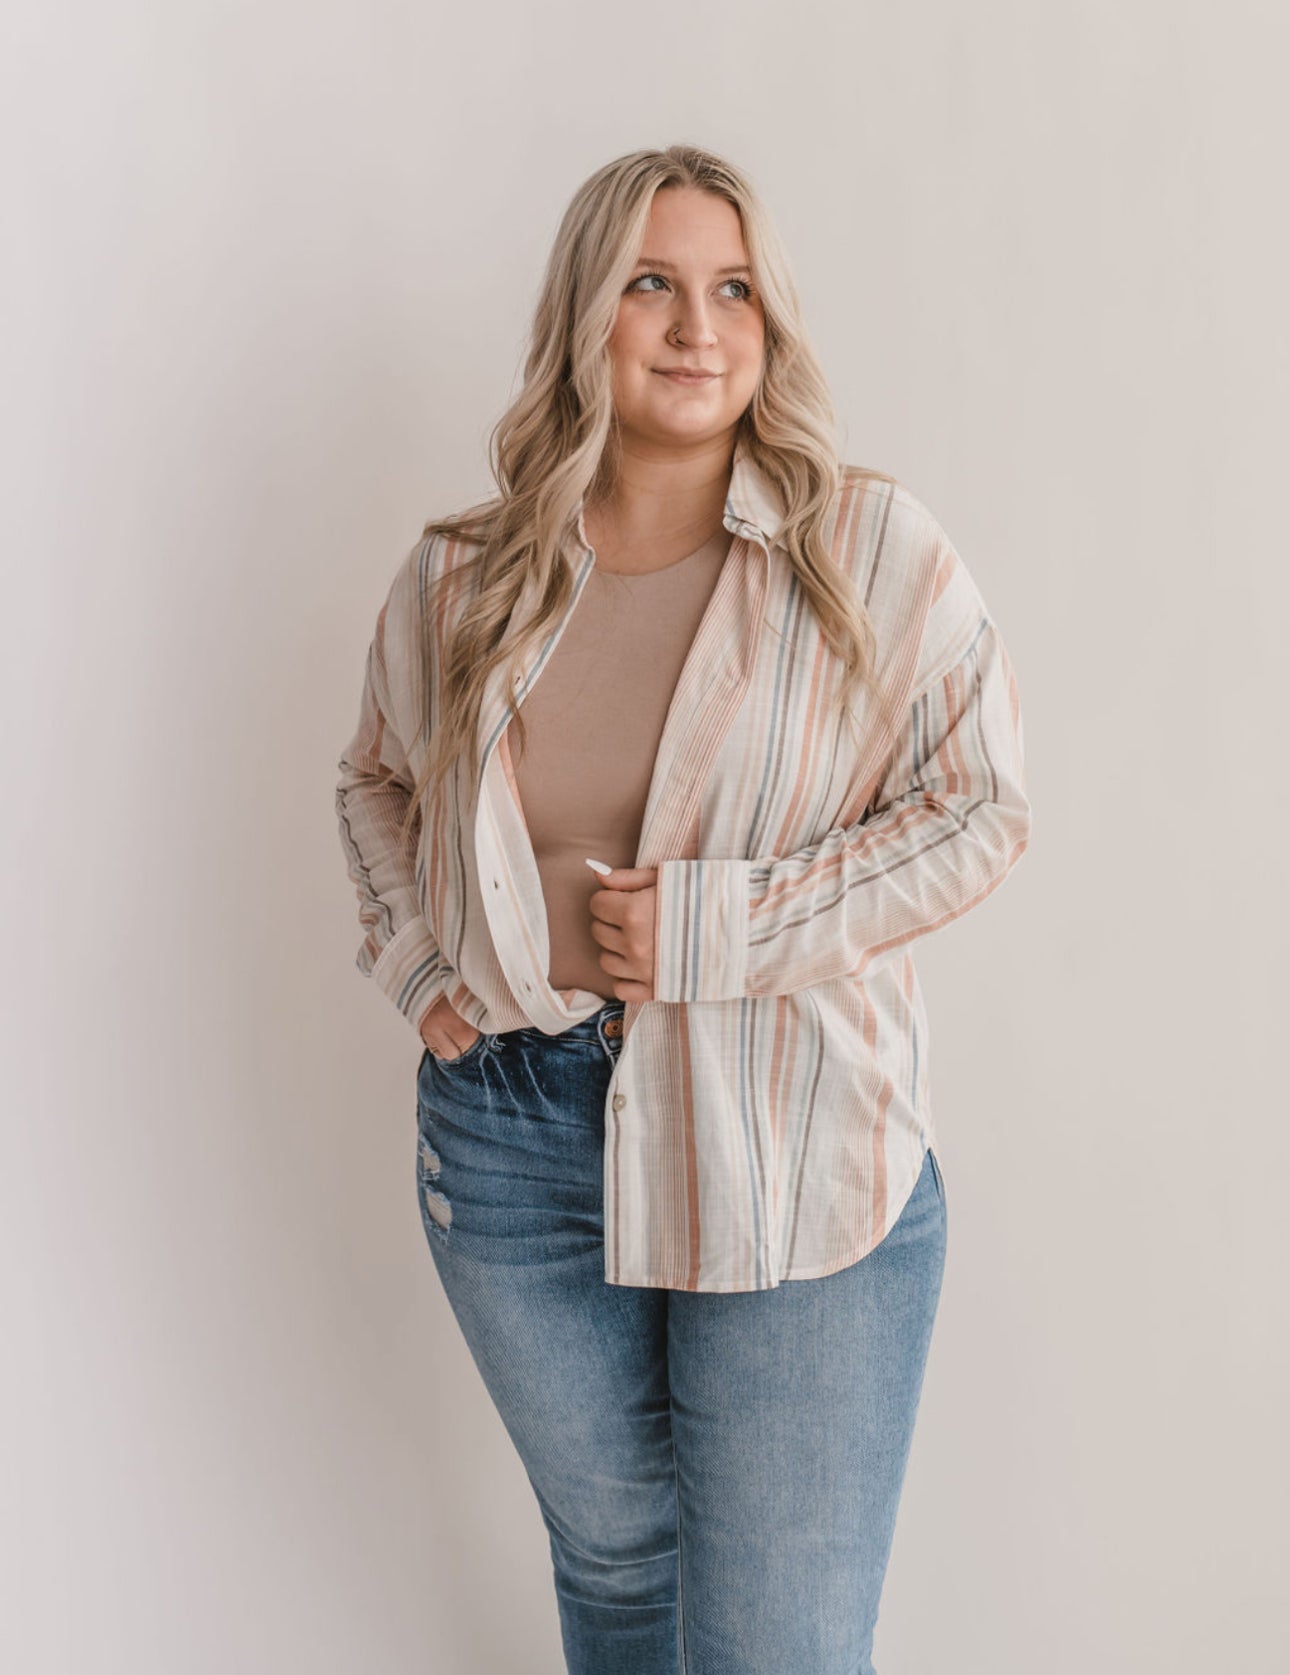 The Stacy Striped Button Up Top